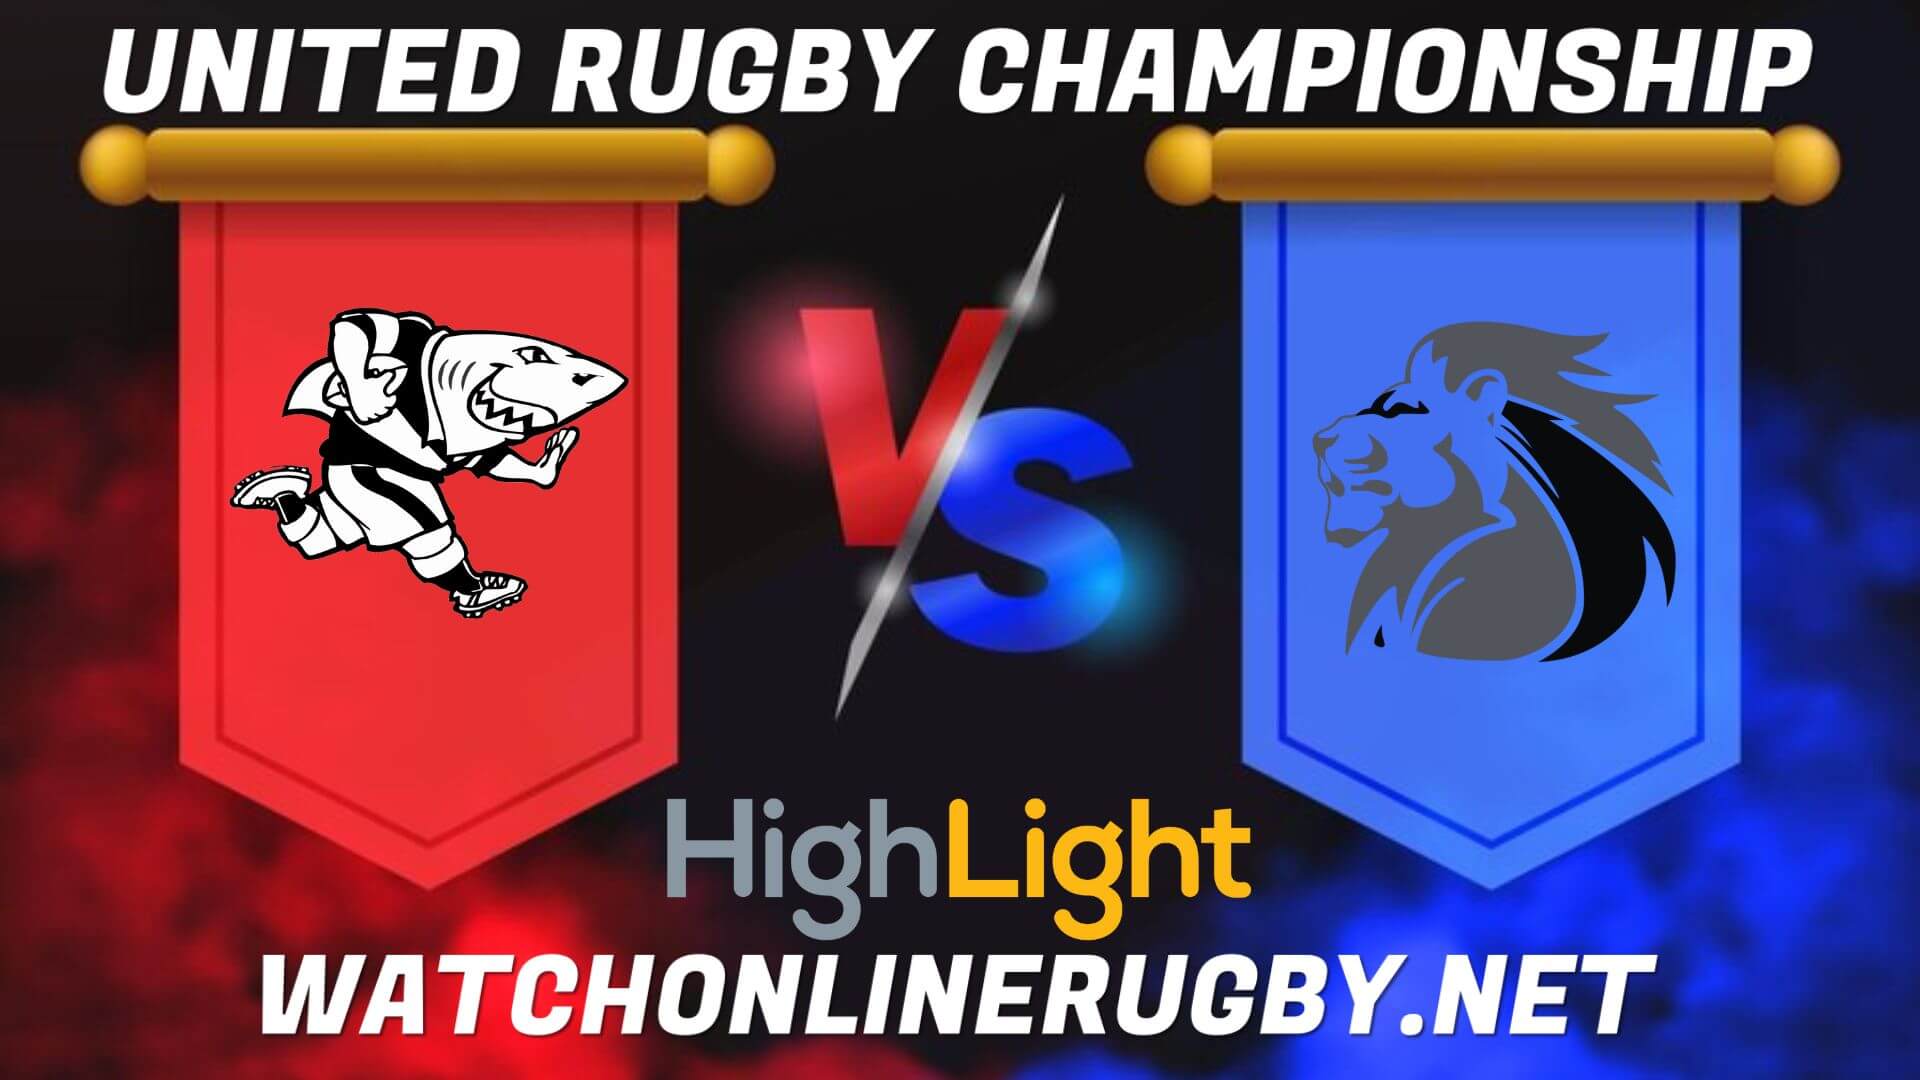 Sharks Vs Lions United Rugby Championship 2022 RD 13